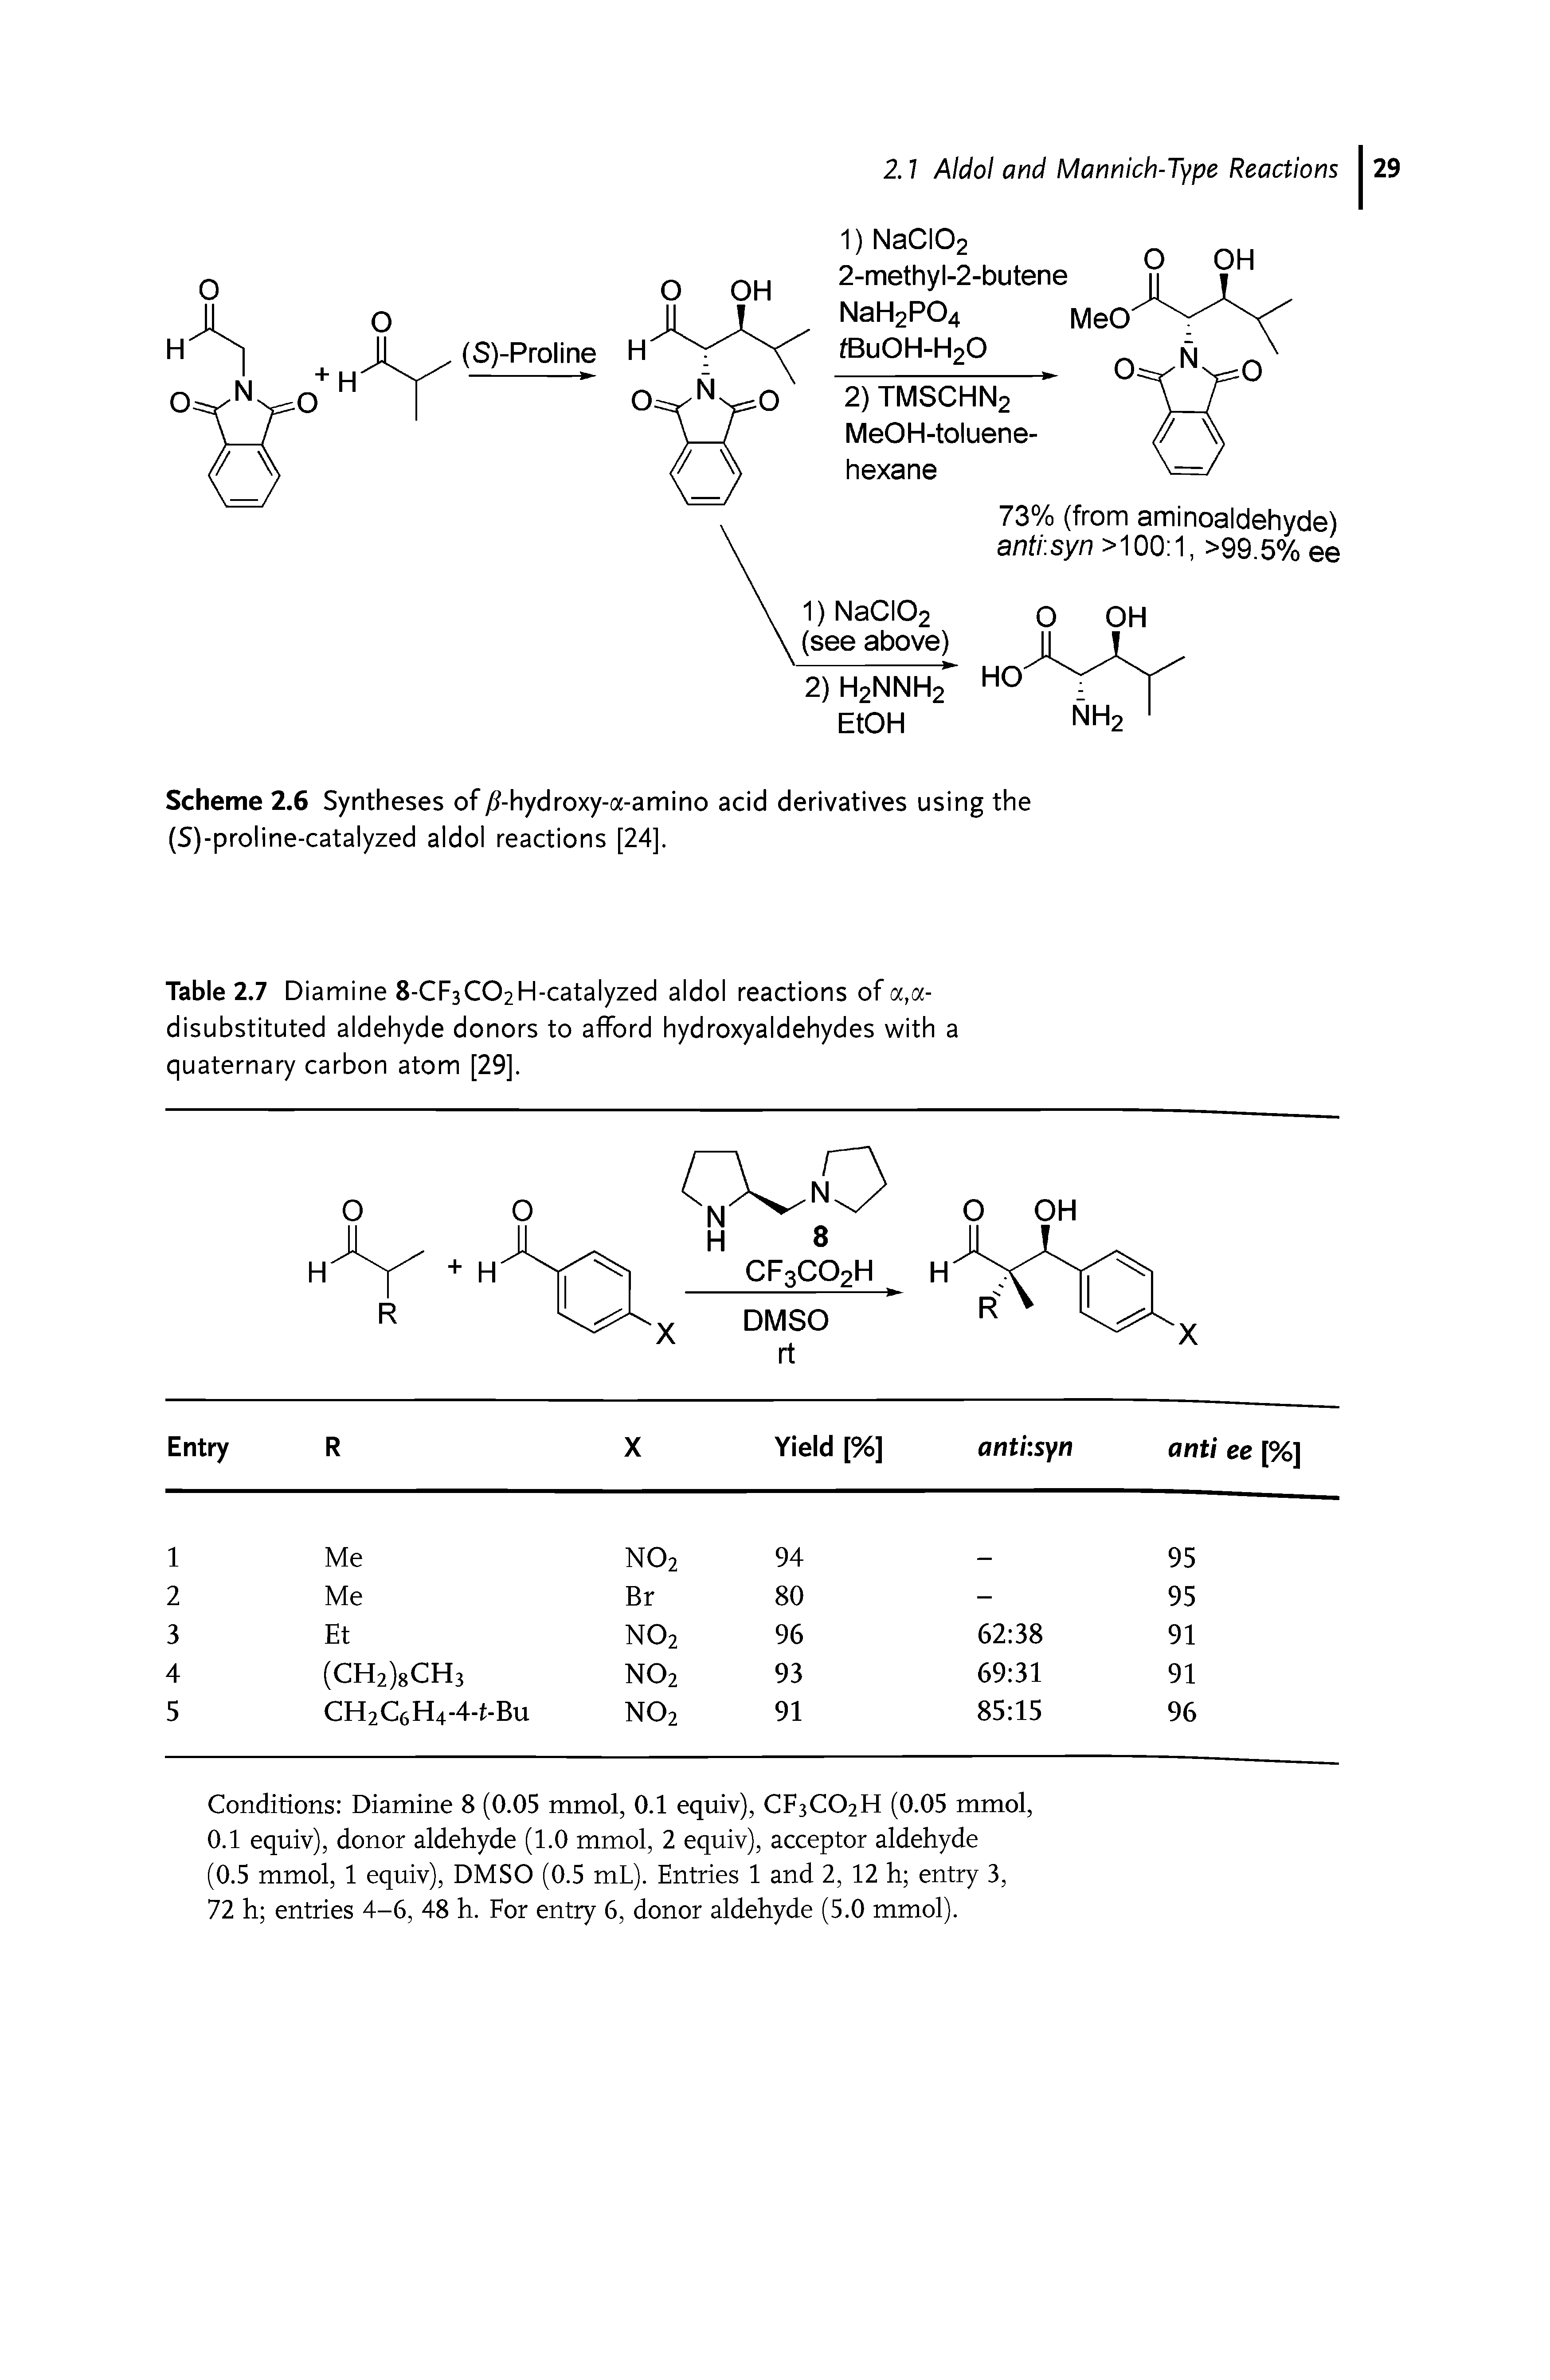 Table 2.7 Diamine 8-CF3C02H-catalyzed aldol reactions of a,a-disubstituted aldehyde donors to afford hydroxyaldehydes with a quaternary carbon atom [29].